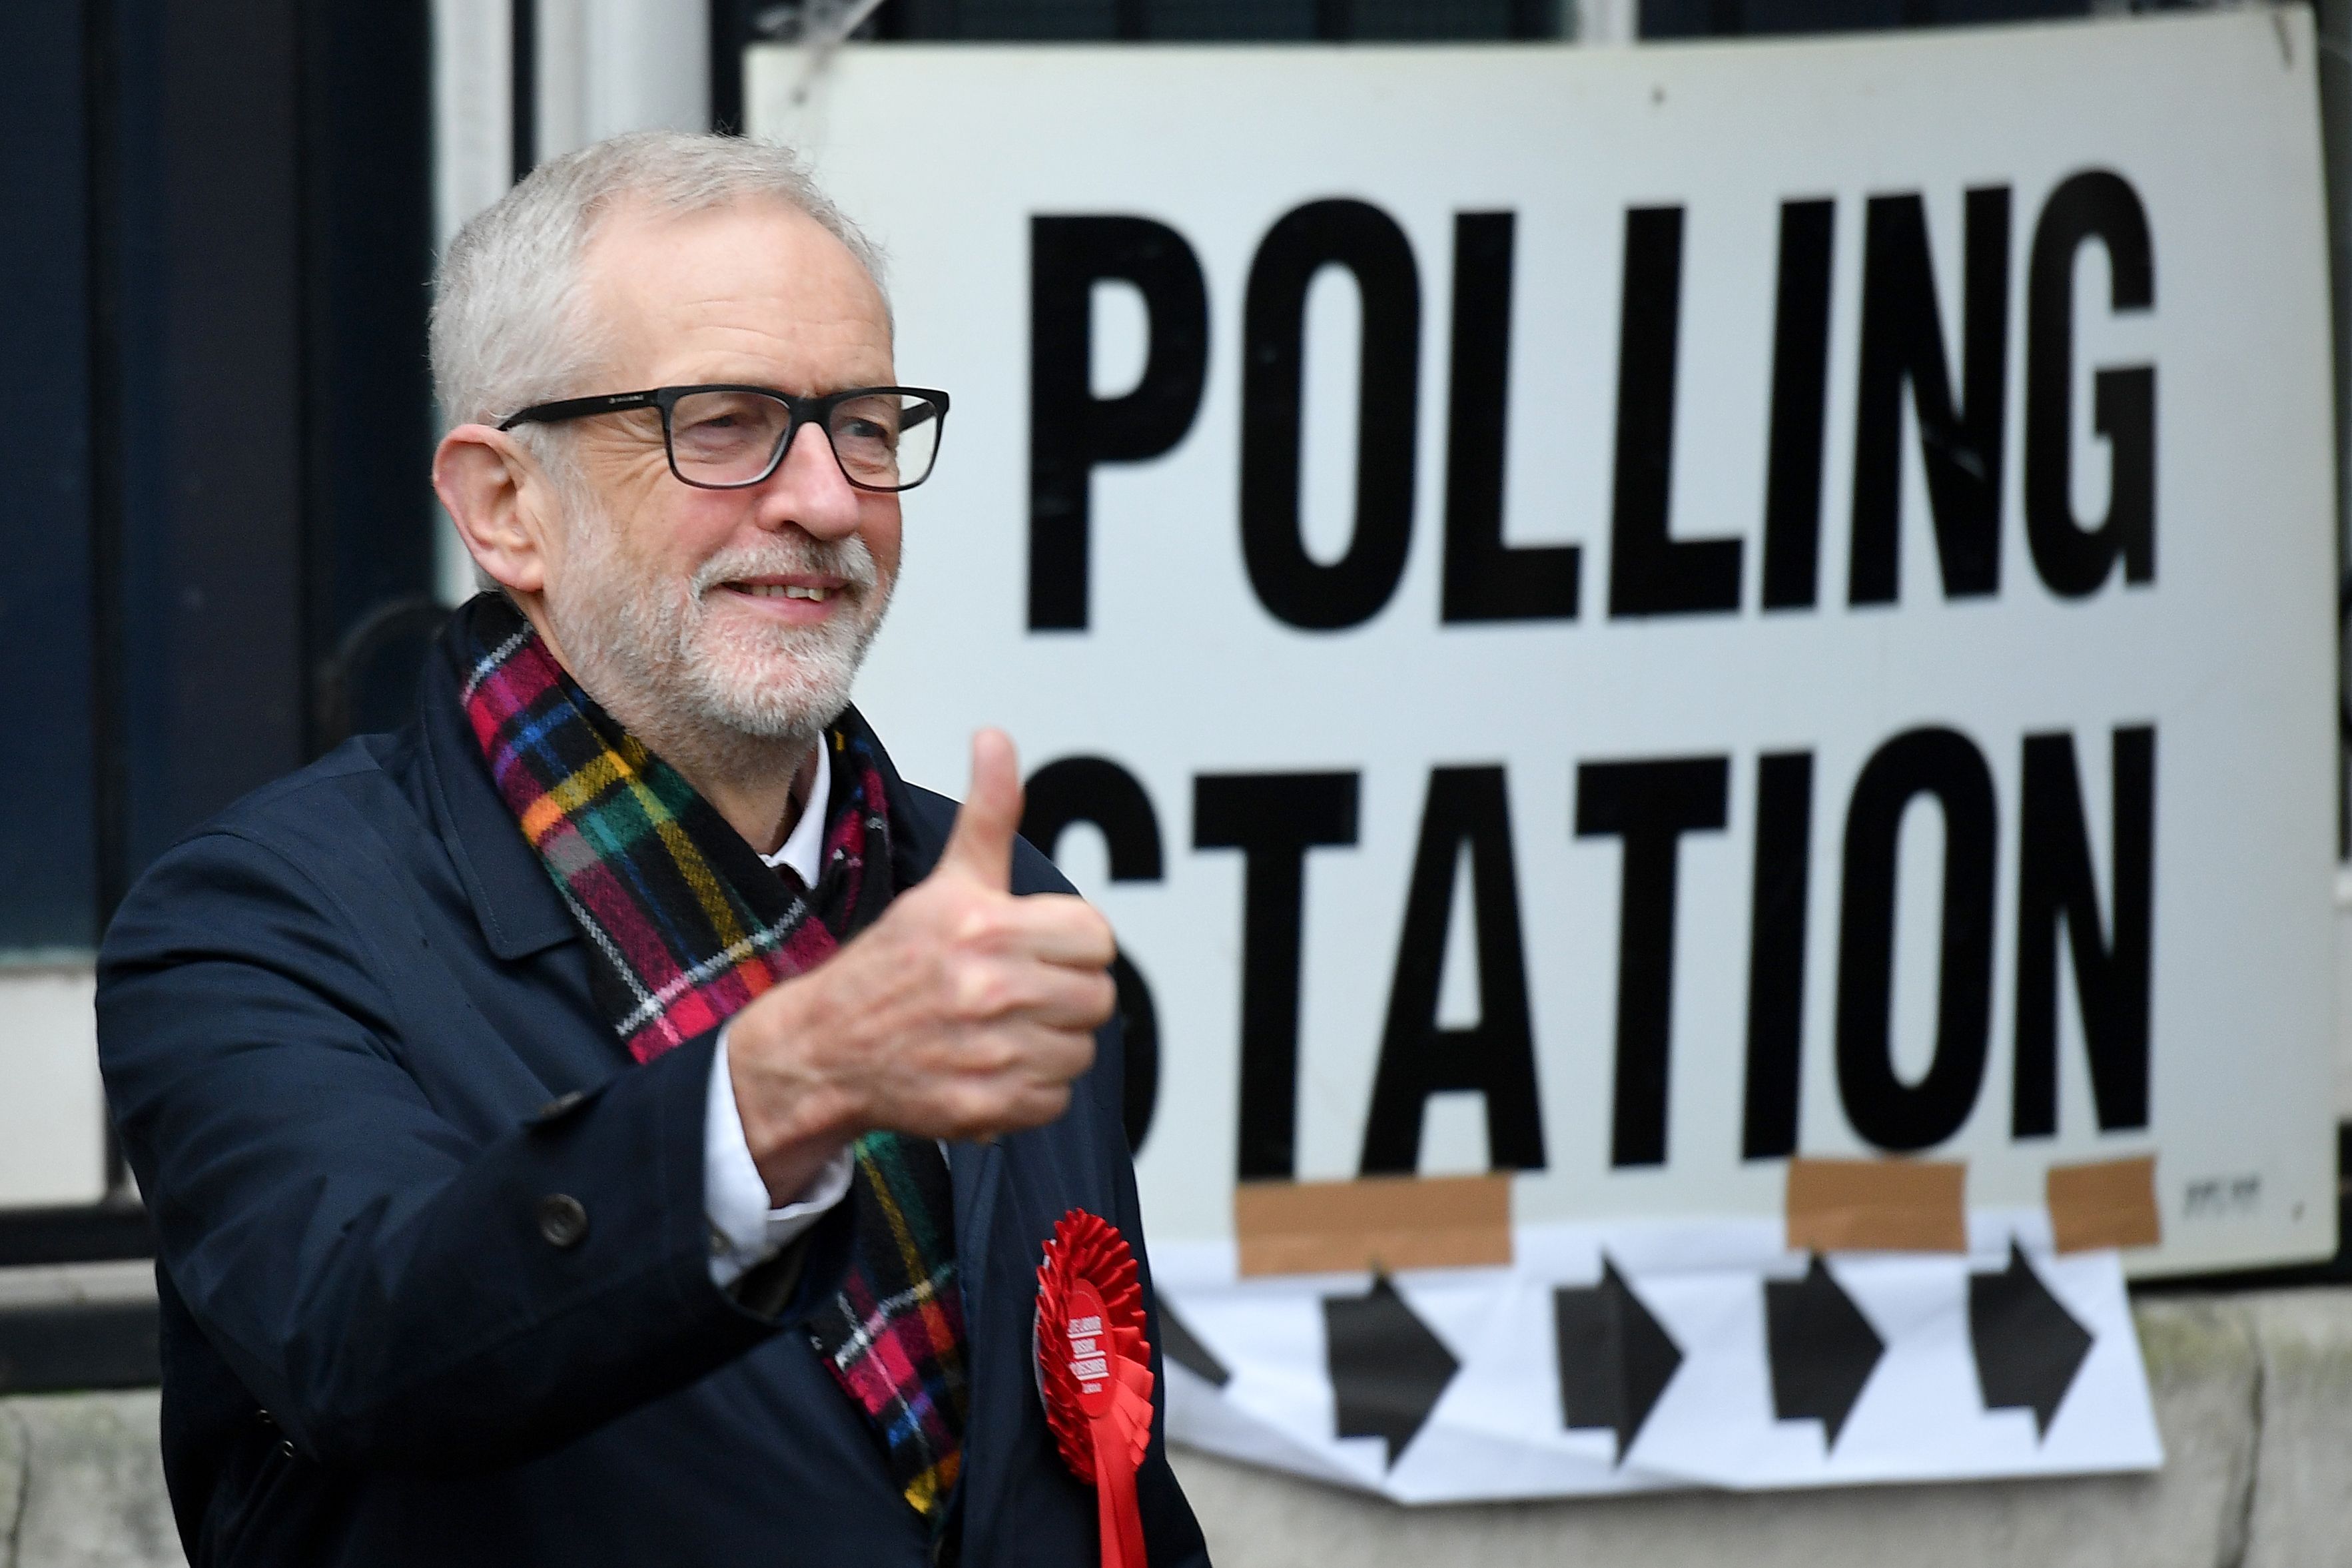 Britain's main opposition Labour Party leader Jeremy Corbyn poses as he arrive at a Polling Station to cast his ballot paper and vote, in north London